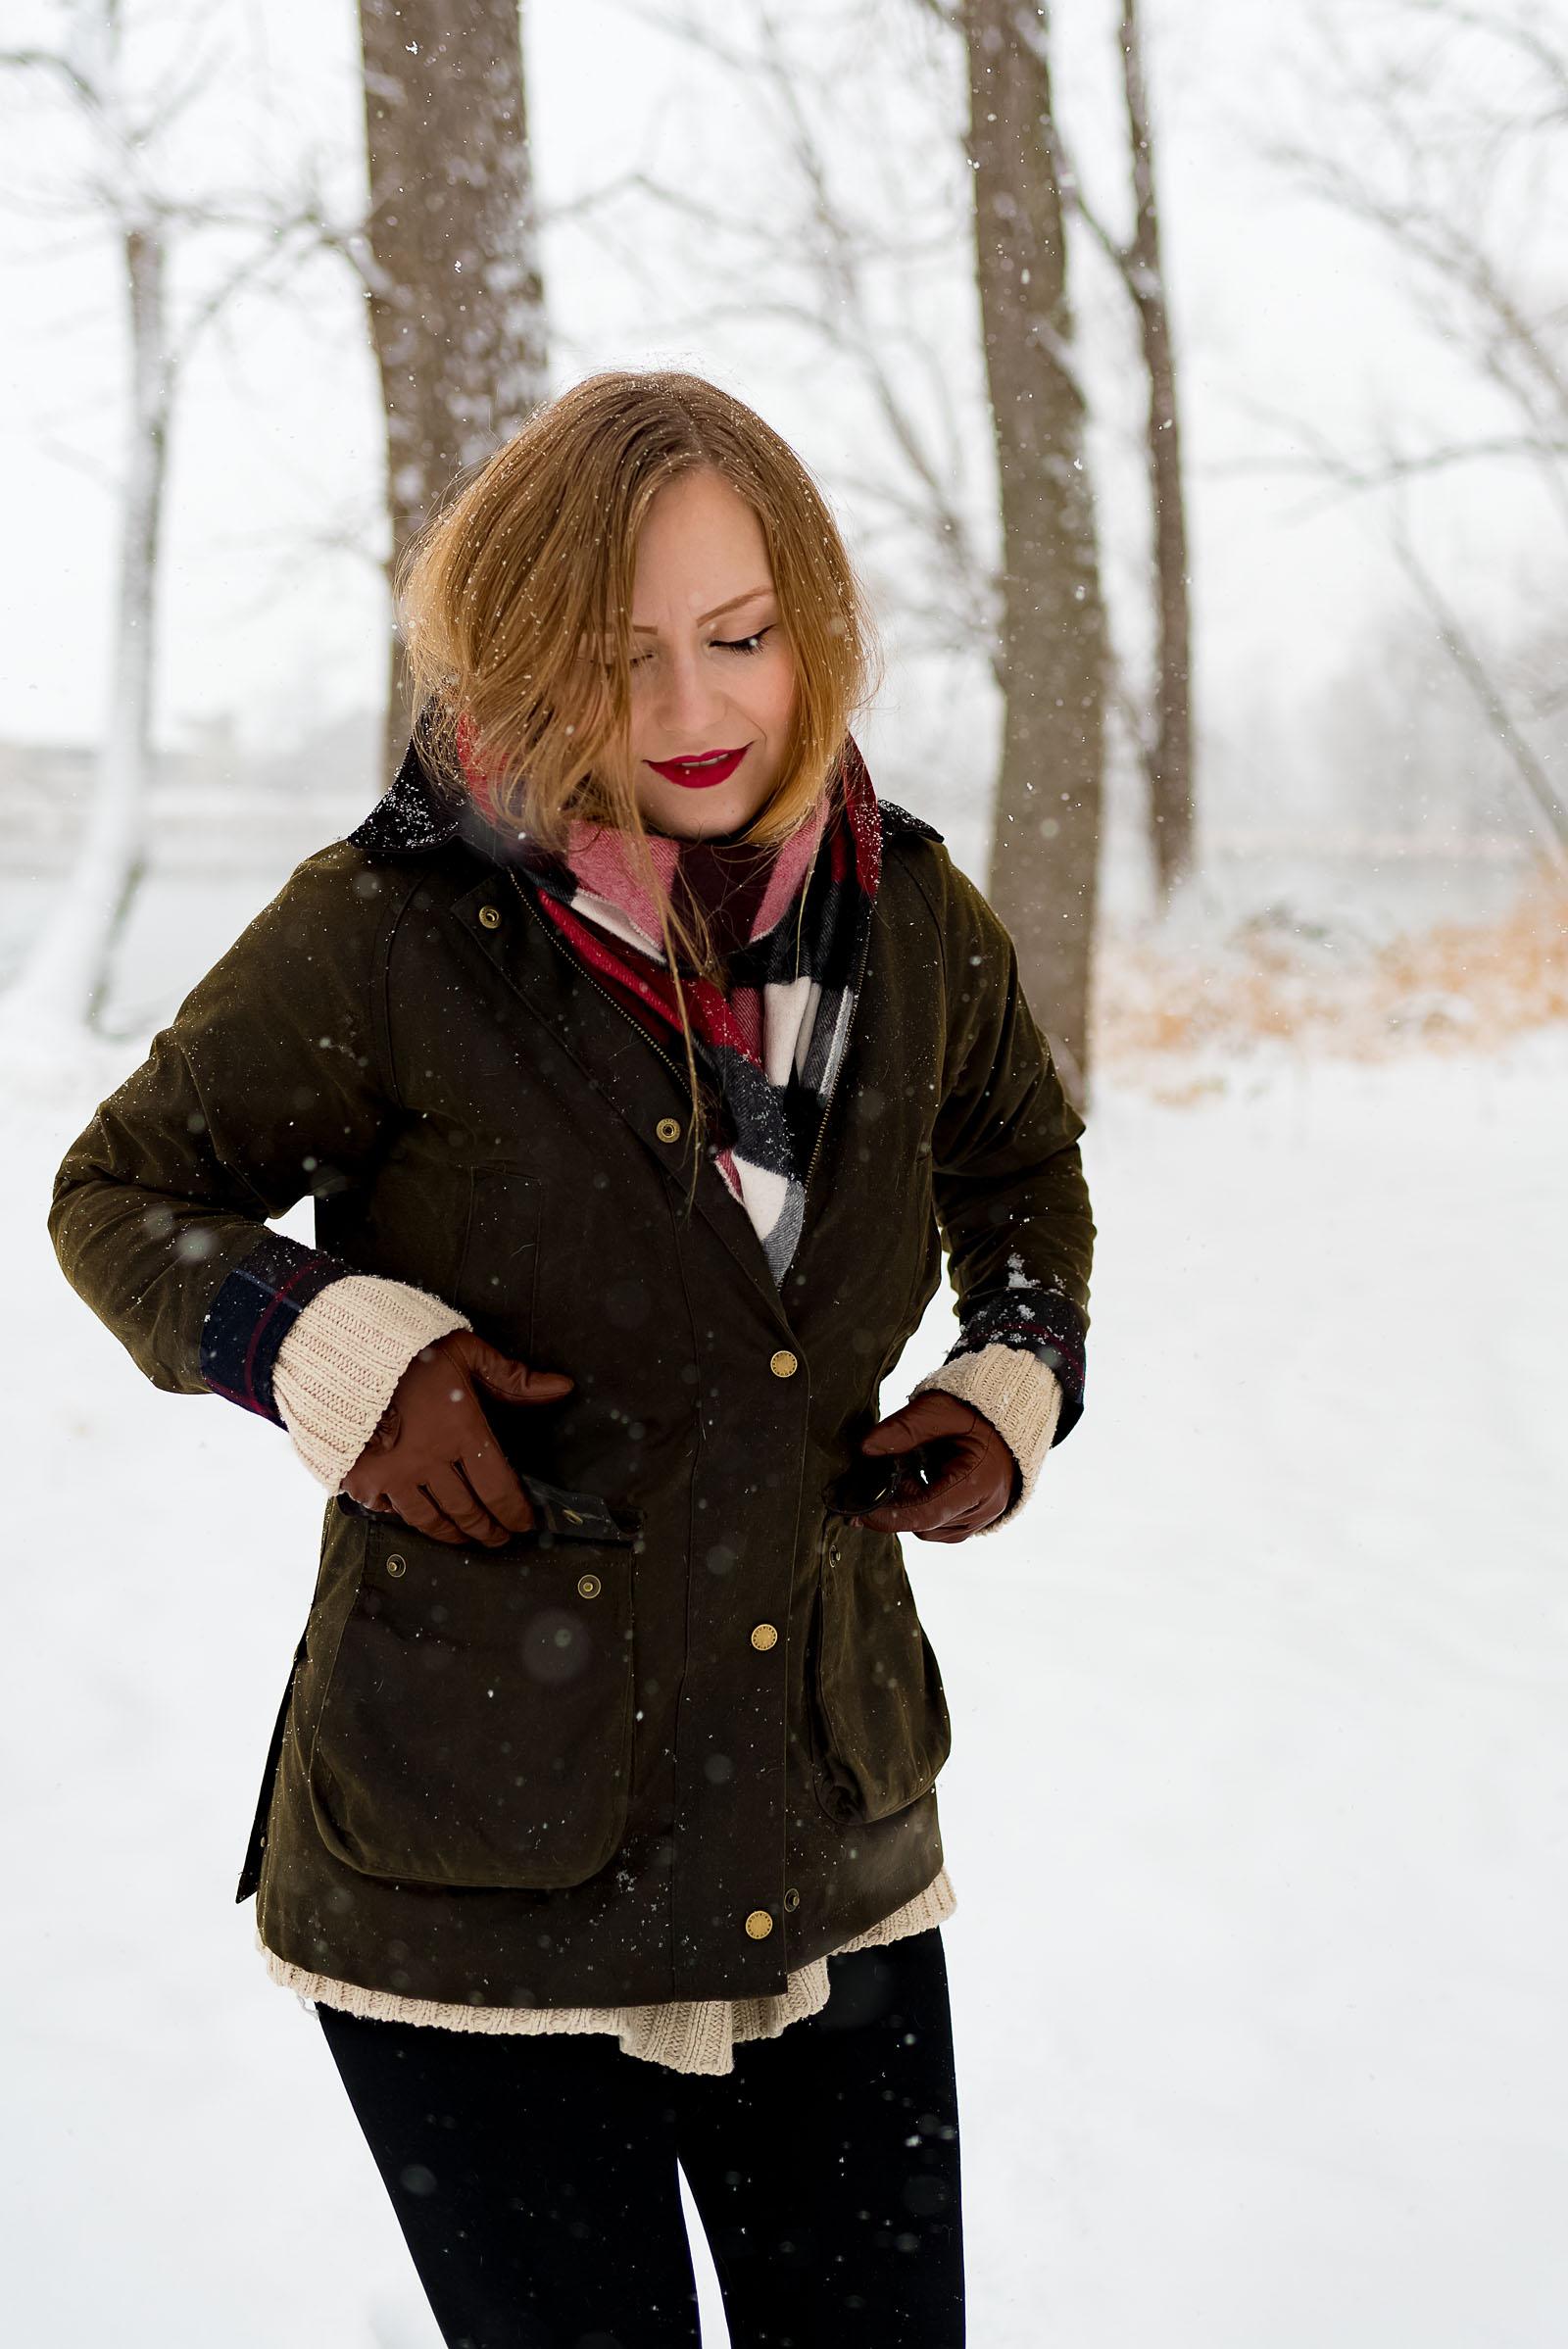 Chic Winter Snow Outfits